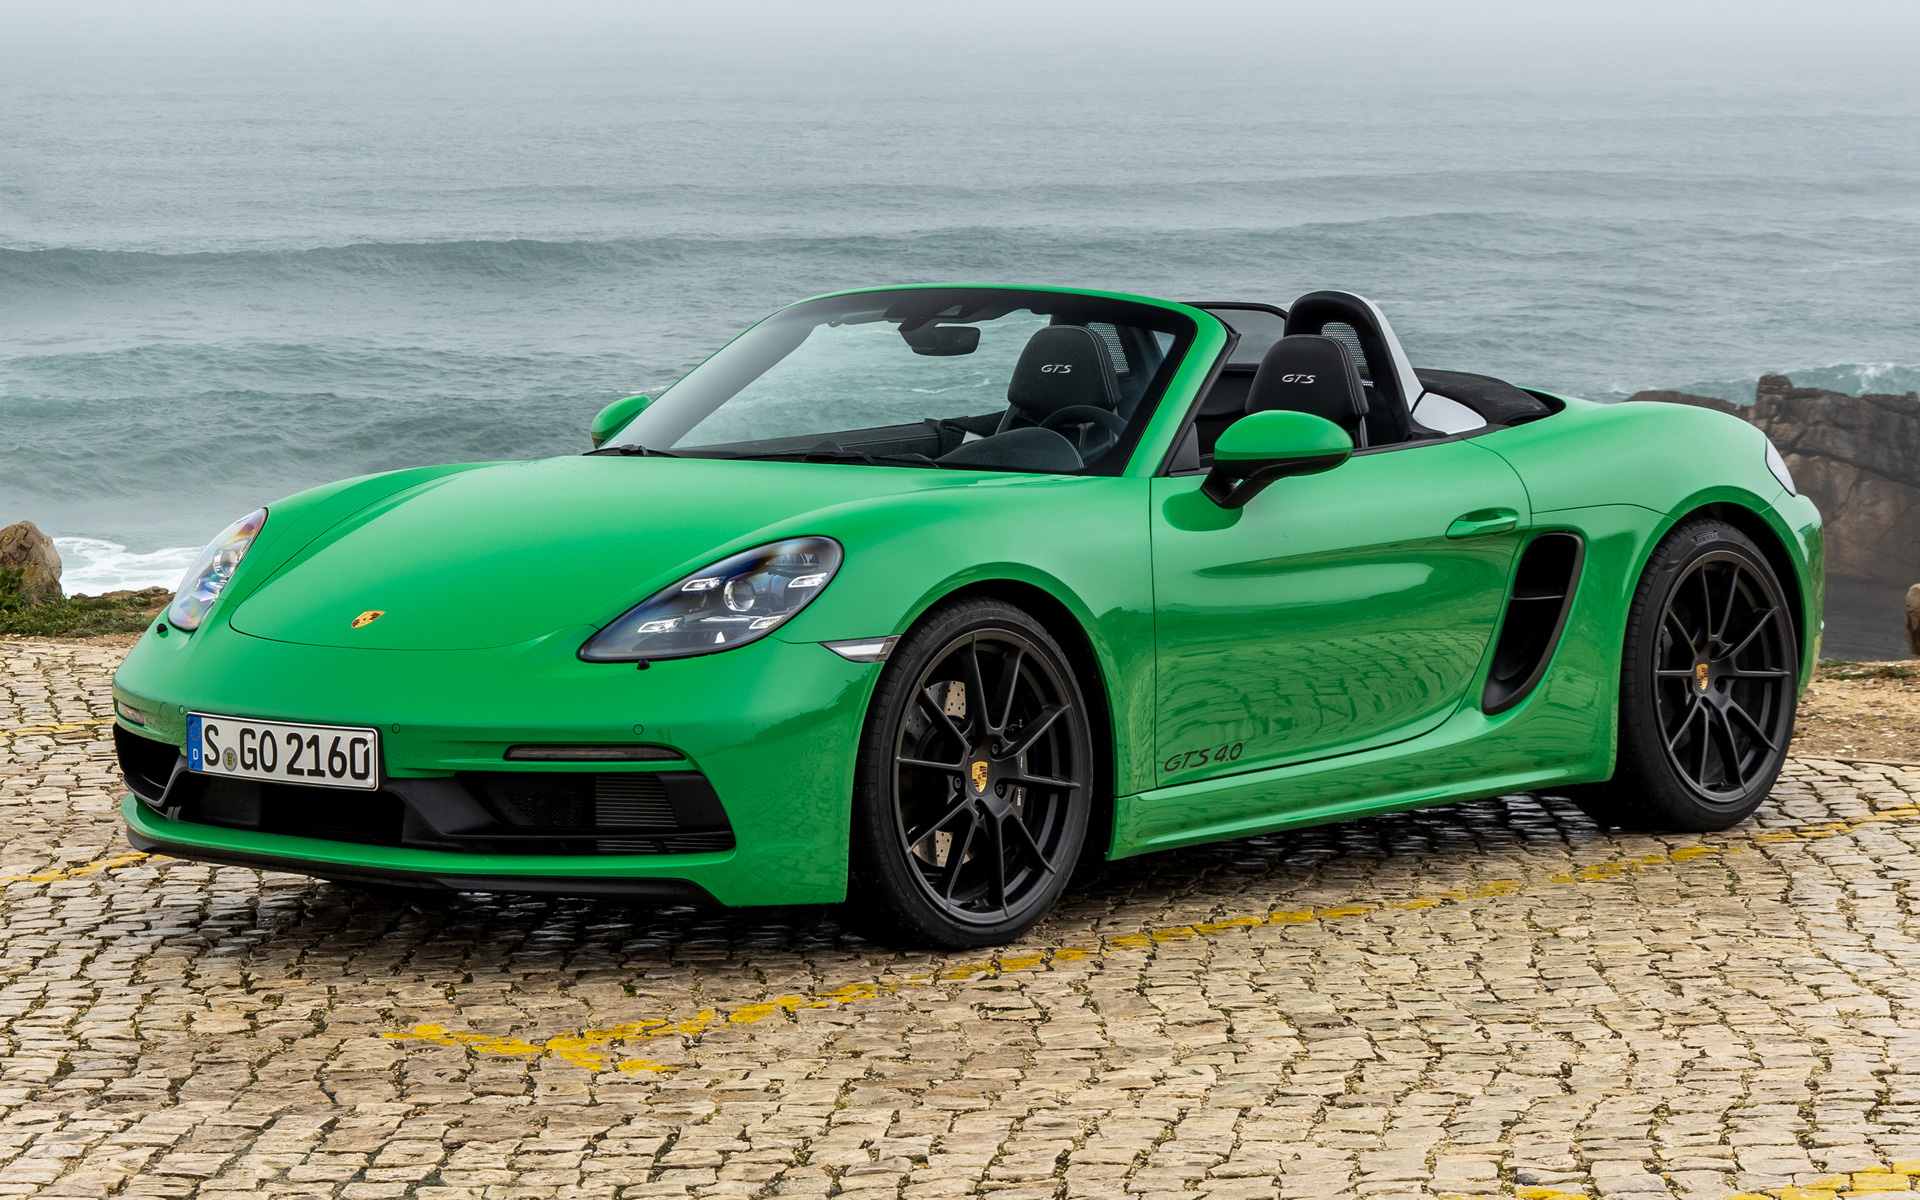 2020 Porsche 718 Boxster GTS 4.0 Wallpapers and HD